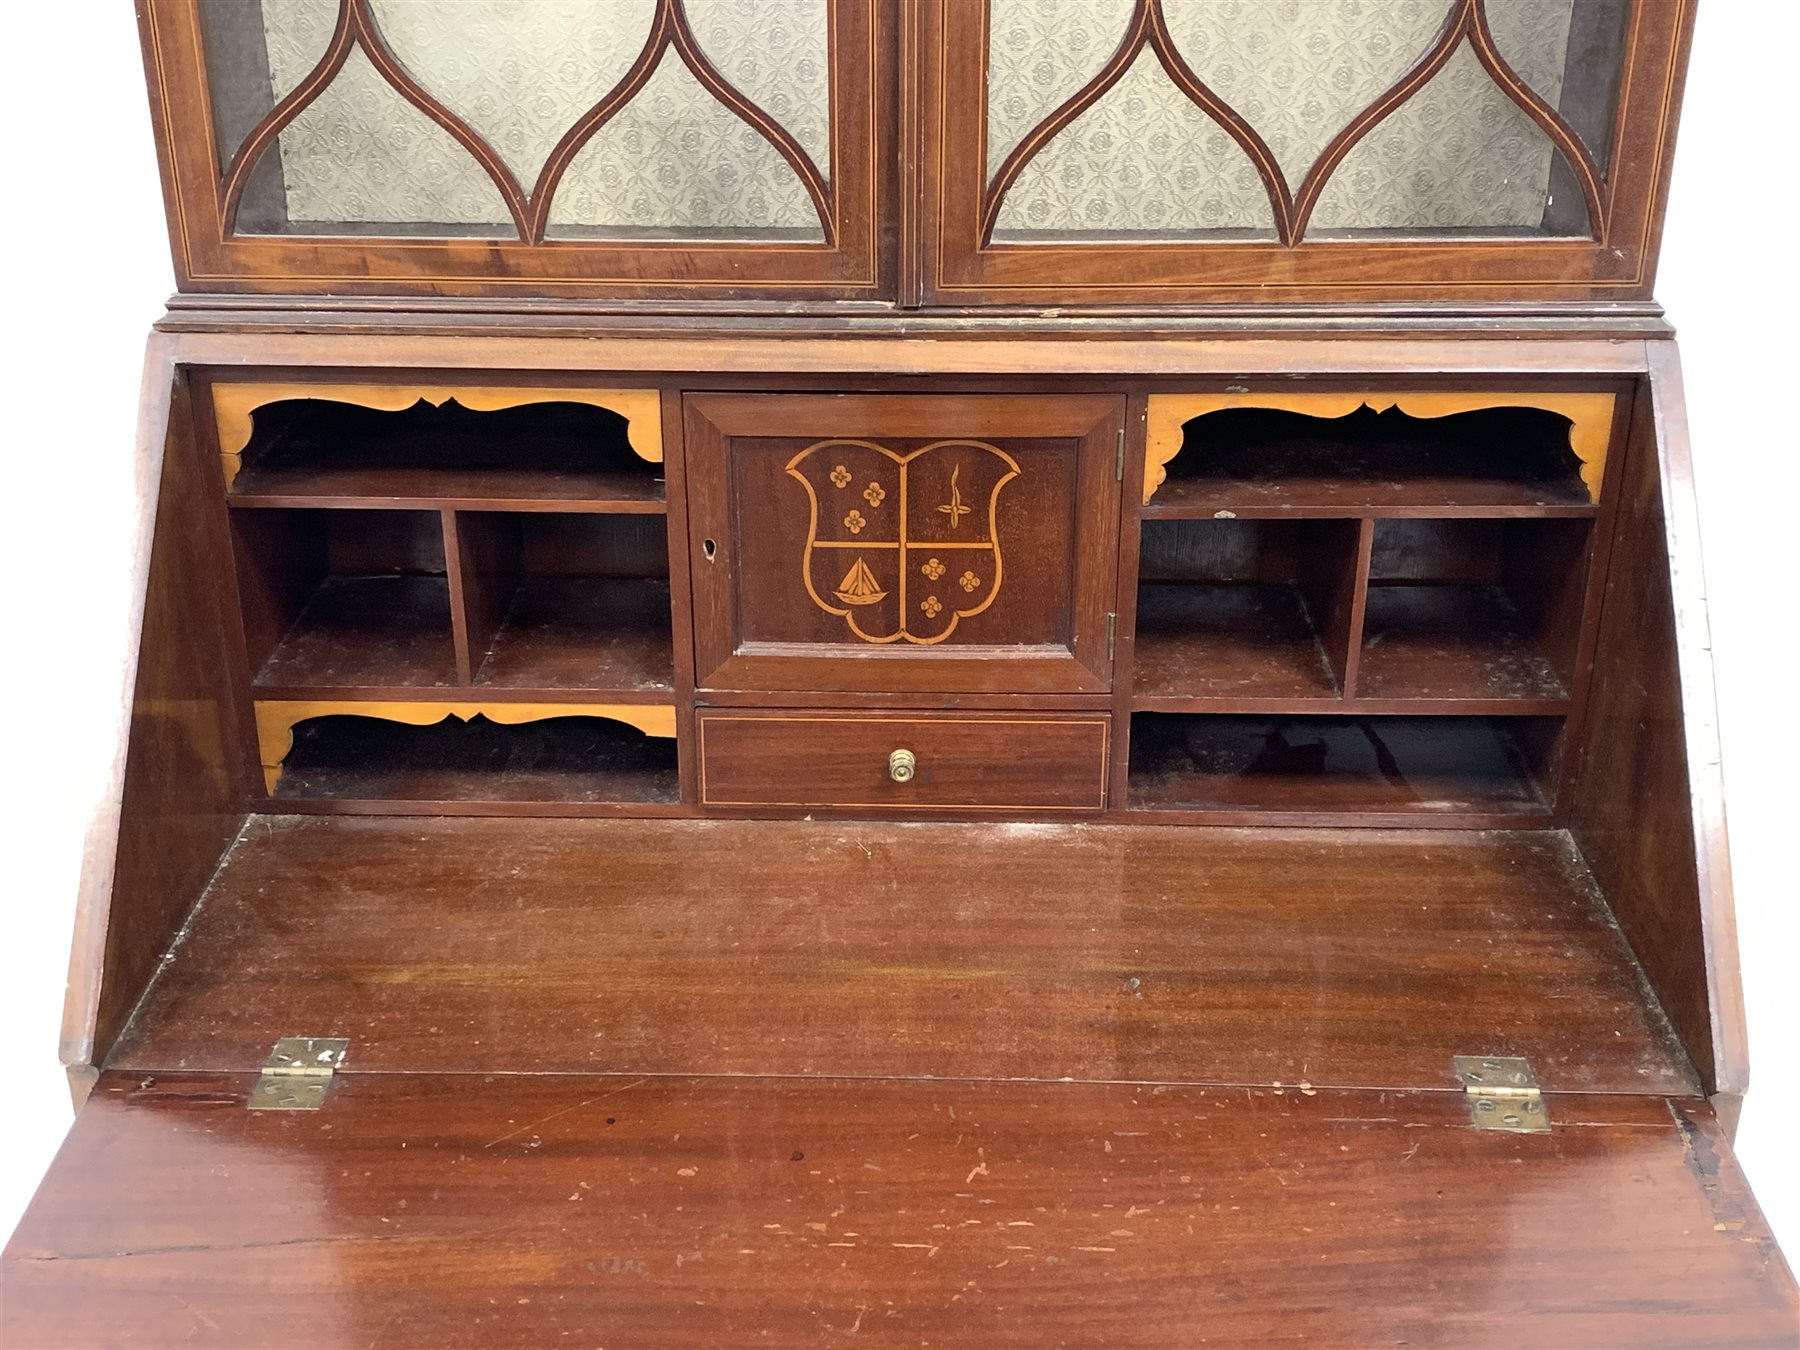 Edwardian mahogany bureau bookcase, the upper section enclosed by a pair of glazed tracery doors, wi - Image 5 of 5